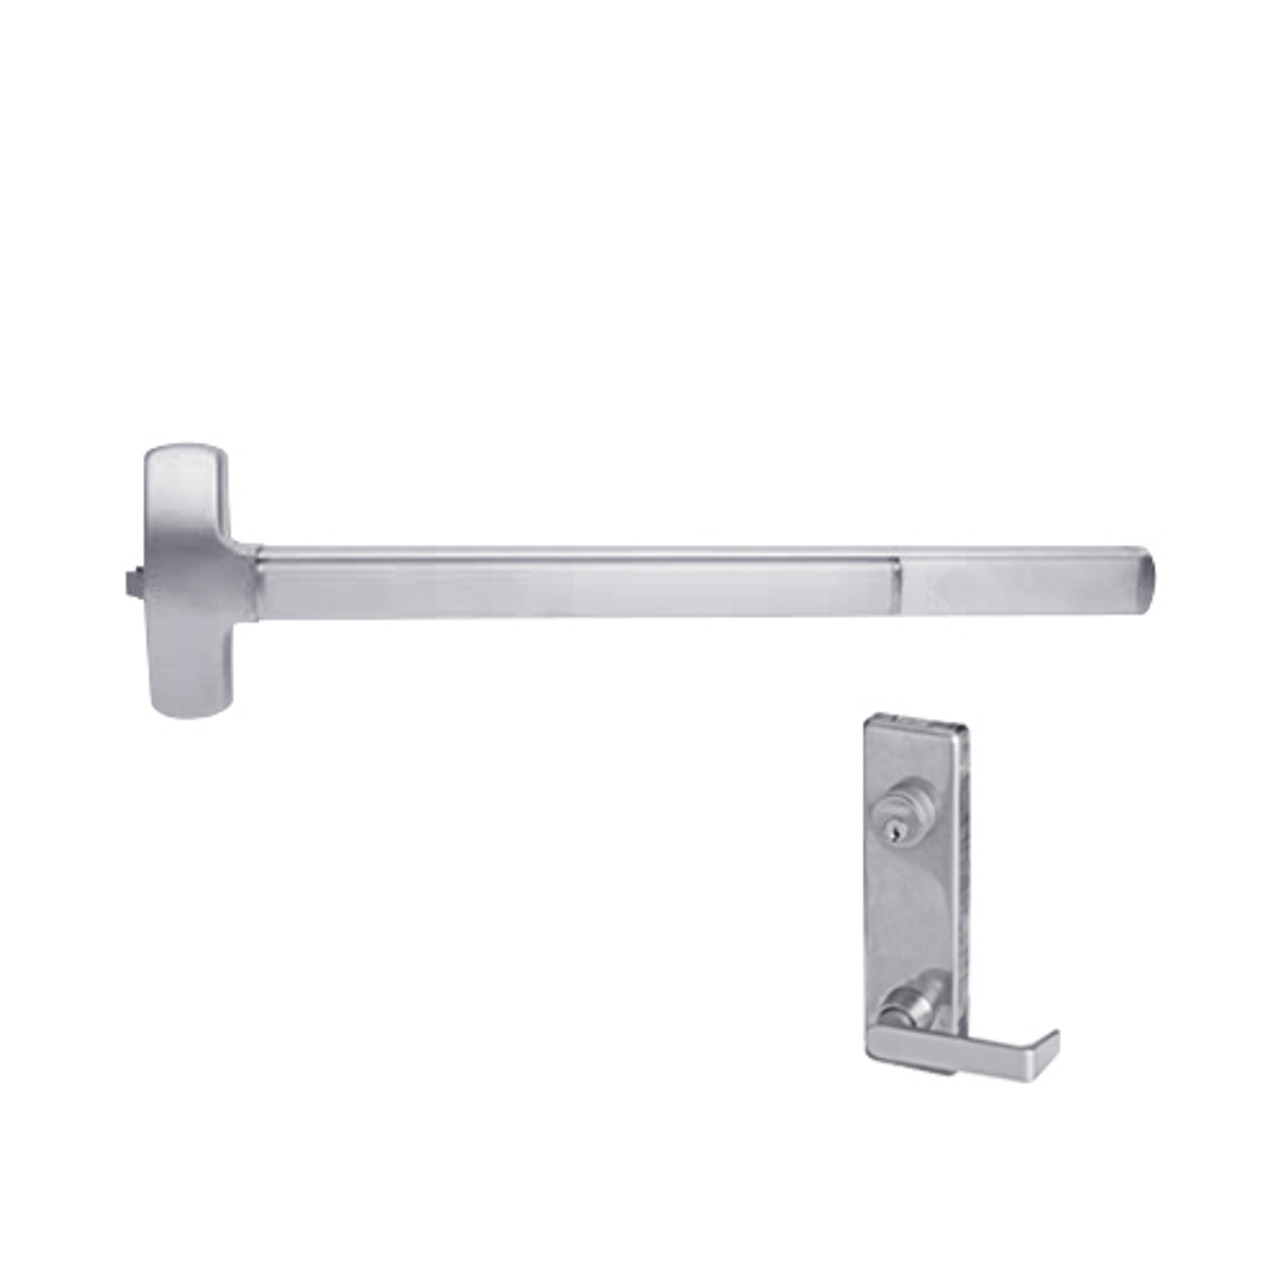 F-25-R-L-NL-DANE-US32-4-RHR Falcon Exit Device in Polished Stainless Steel